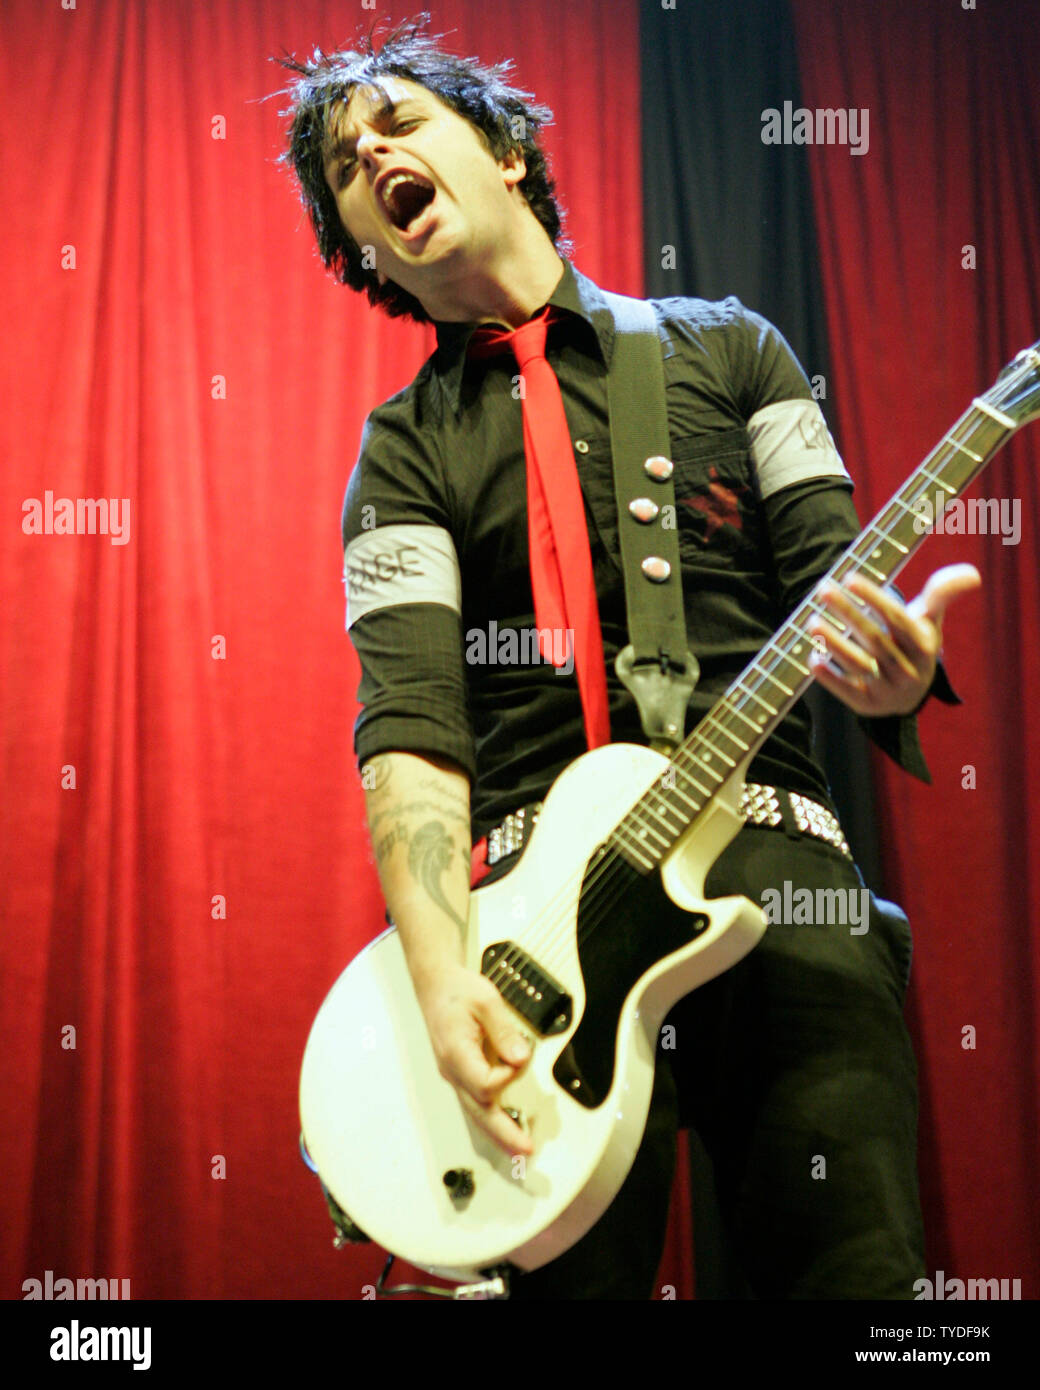 Billie Joe Armstrong with Green Day performs in concert, at the Office Depot Center, in Sunrise,  Florida, on August 26, 2005.  (UPI Photo/Michael Bush) Stock Photo